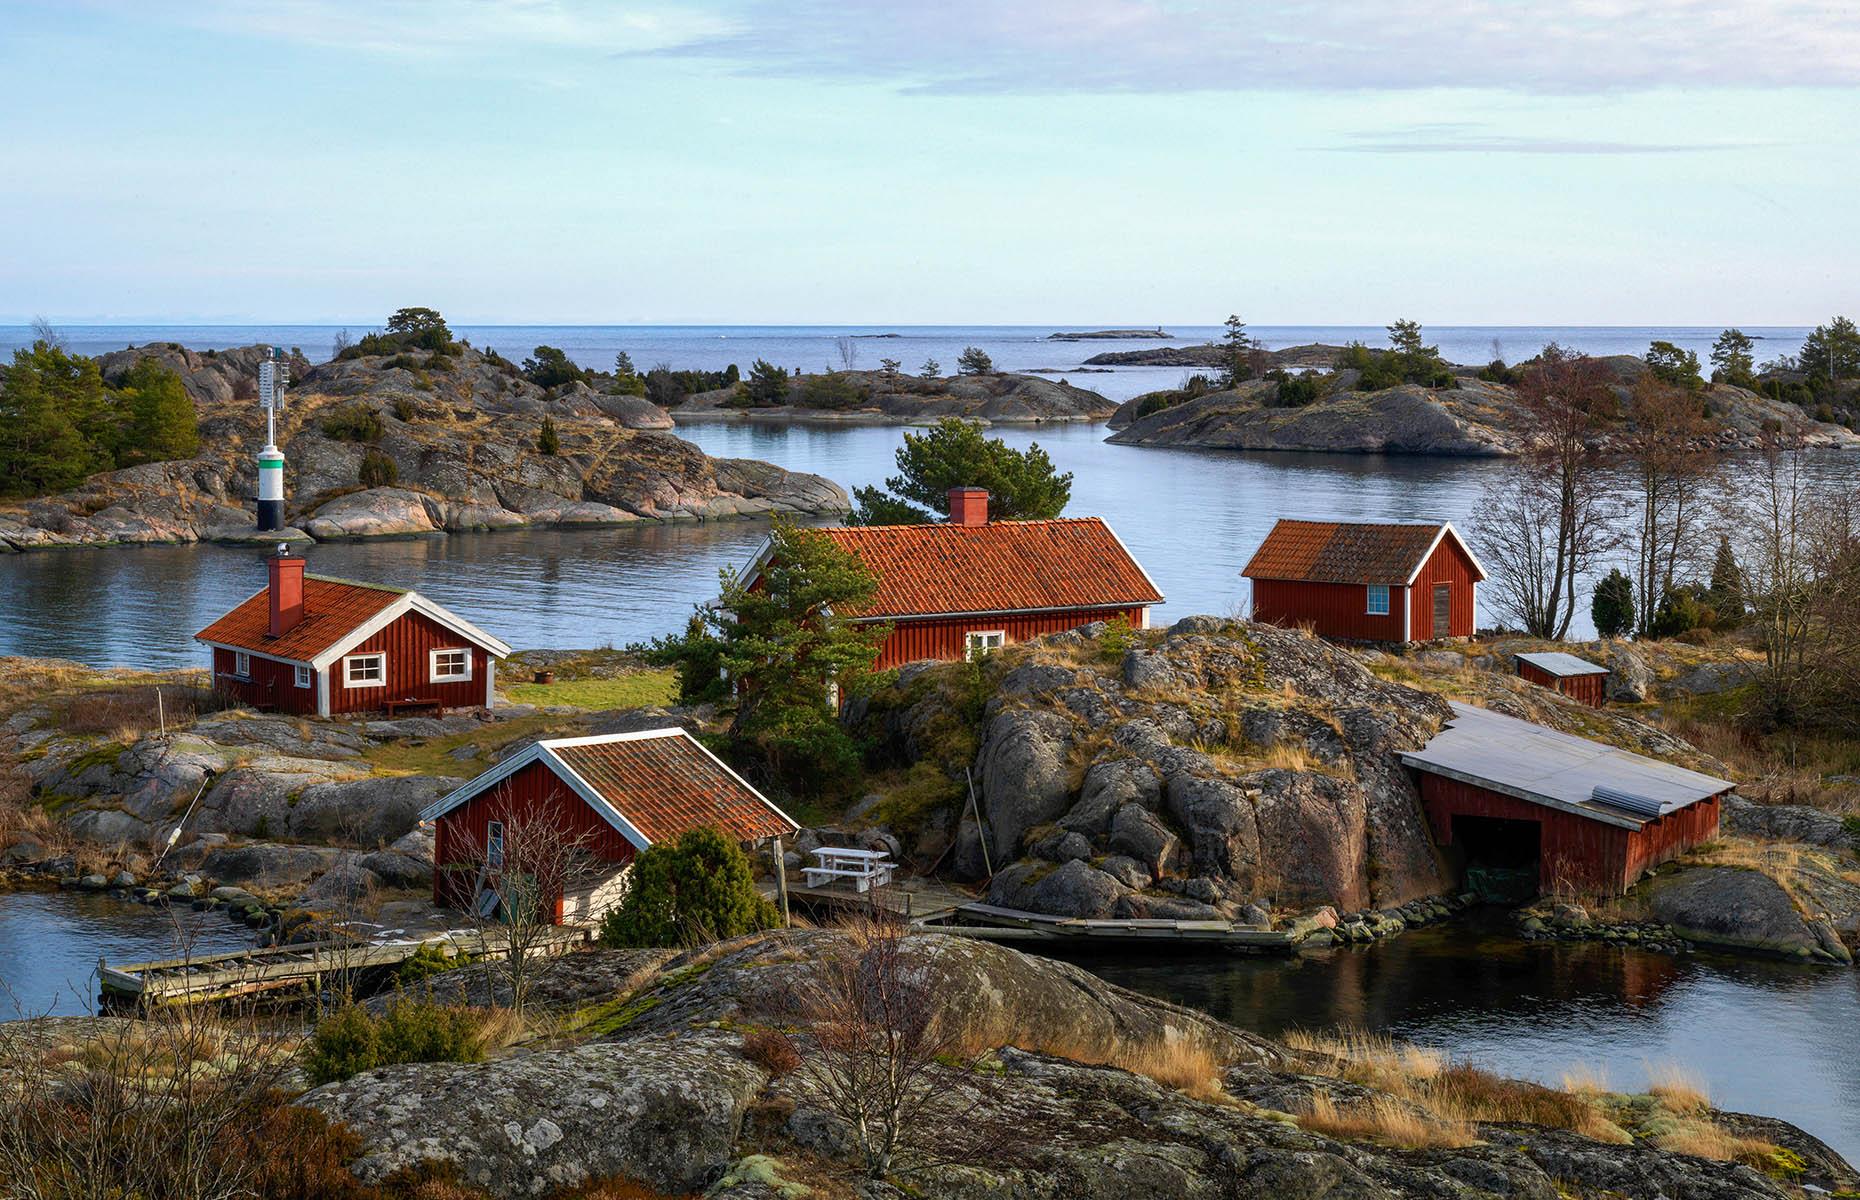 <p>The official slogan for Smaland in southern Sweden is ‘Sweden for real.’ It's a dazzling area of dense old-growth forests, sparkling lakes and quaint red cottages, rich in culture and steeped in proud culinary traditions. It’s also the Sweden that brought the world IKEA, Bjorn from ABBA and the author Astrid Lindgren.</p>  <p><strong>Click through this gallery to learn more about Smaland, and discover the best things to see and do in this authentic Swedish region...</strong></p>